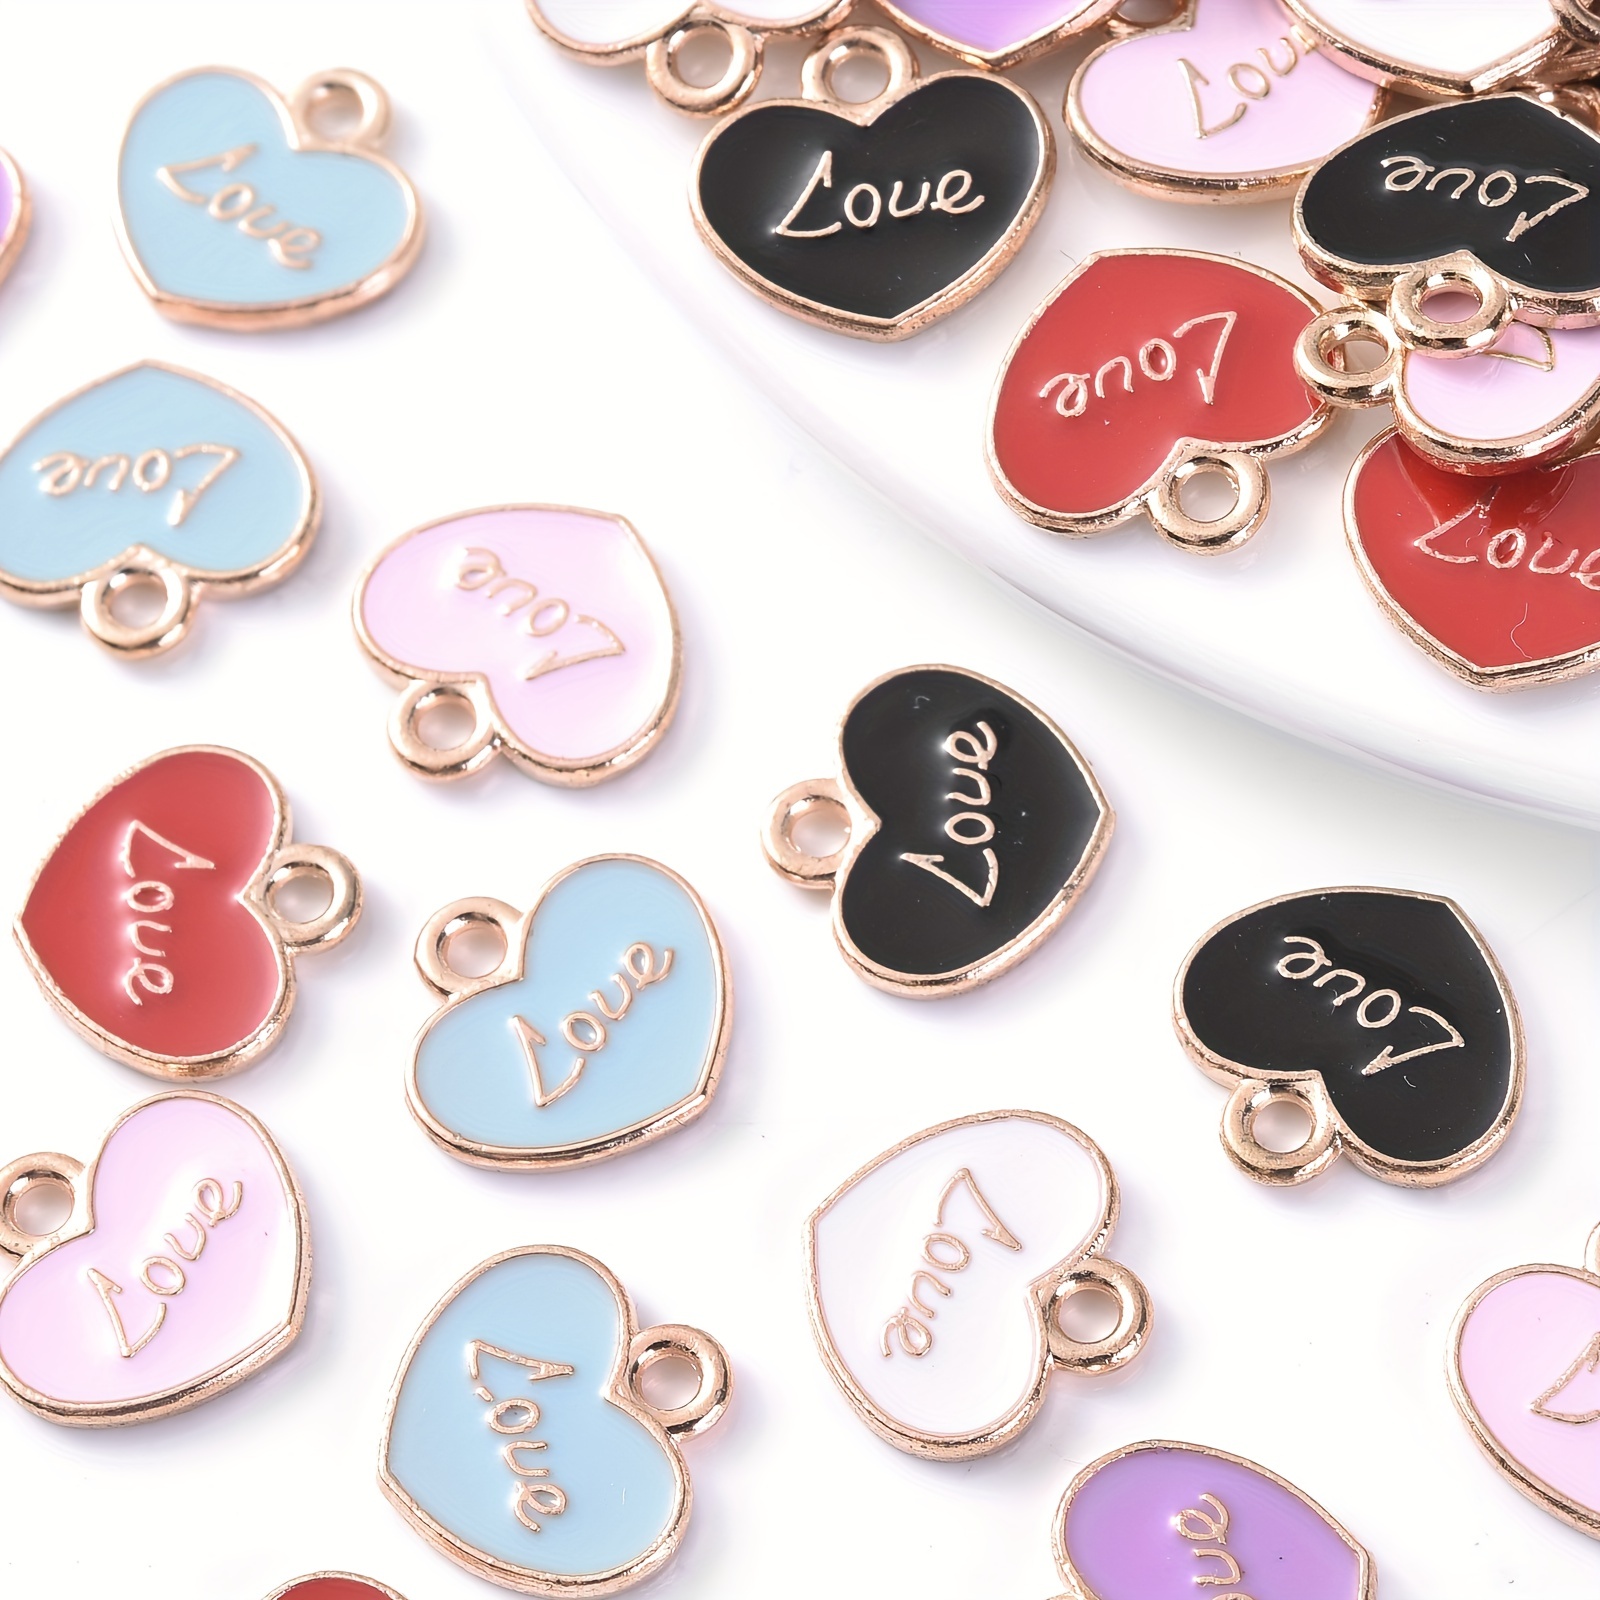 Random 50pcs Jewelry Making Charms Assorted KC Golden Enamel Plated Charms  Pendant For DIY Necklace Bracelet Earrings Jewelry Making Finding